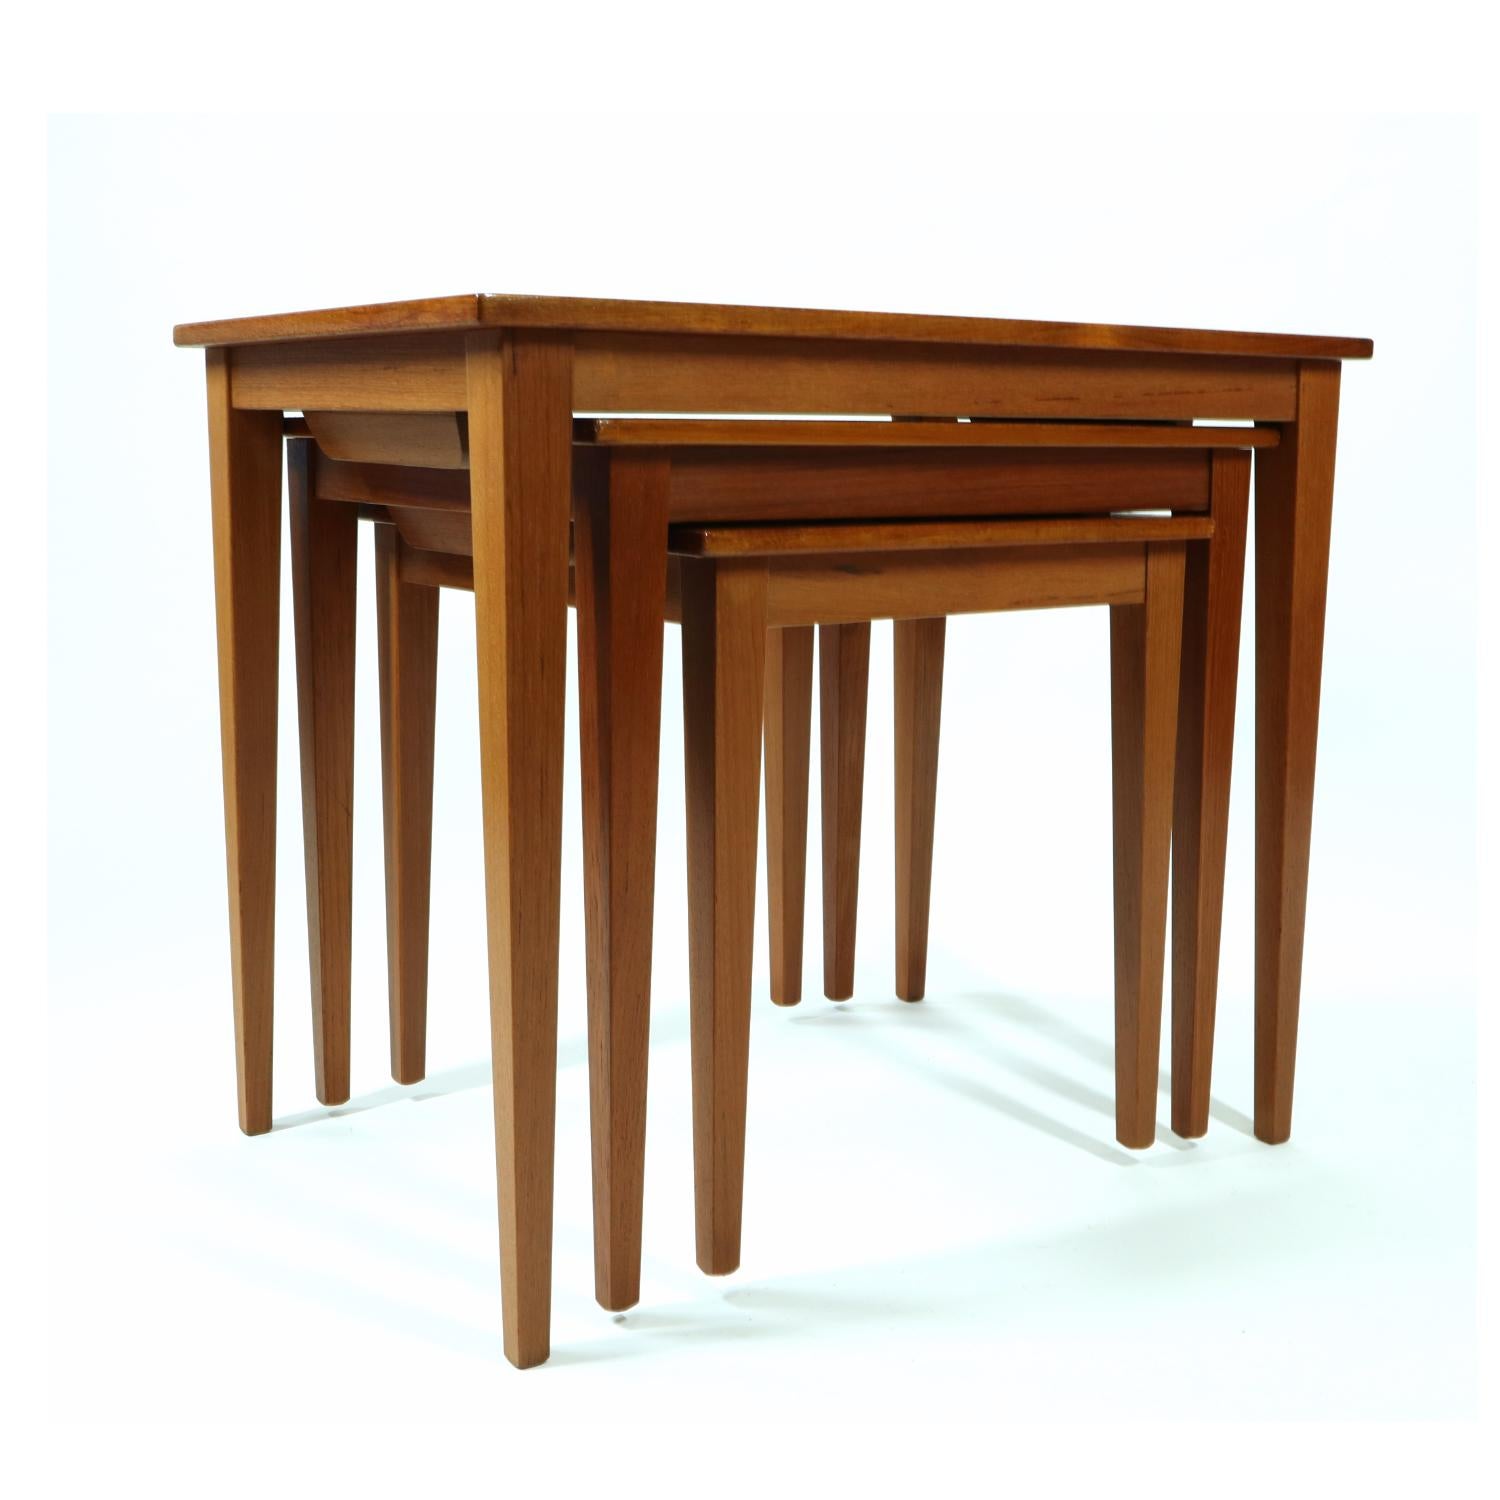 Vintage Mid-Century Modern Danish teak nesting tables, freshly restored. This set of three side tables are unmarked, but exhibit exceptional quality. The set includes three tables of ascending size. Both of the smaller tables nest within each other